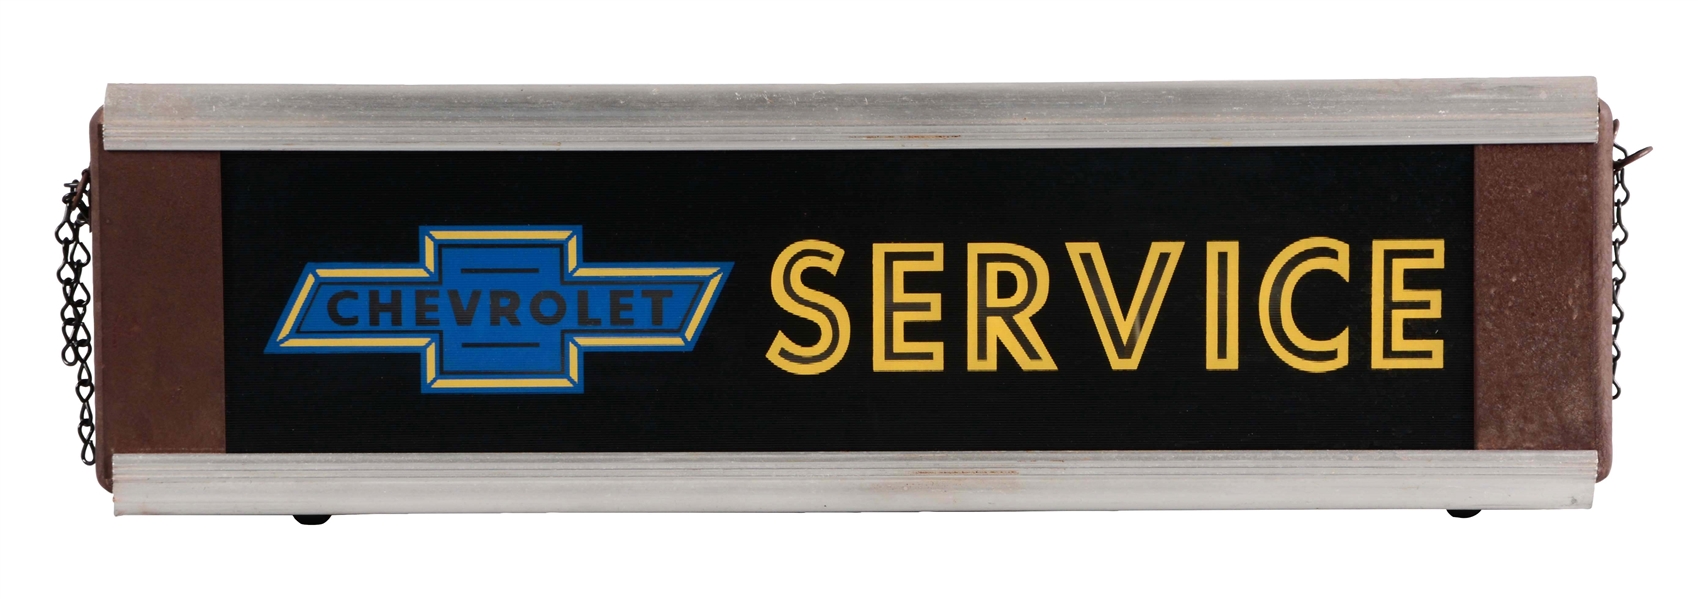 CHEVROLET SERVICE GLASS LIGHT UP STORE DISPLAY SIGN.